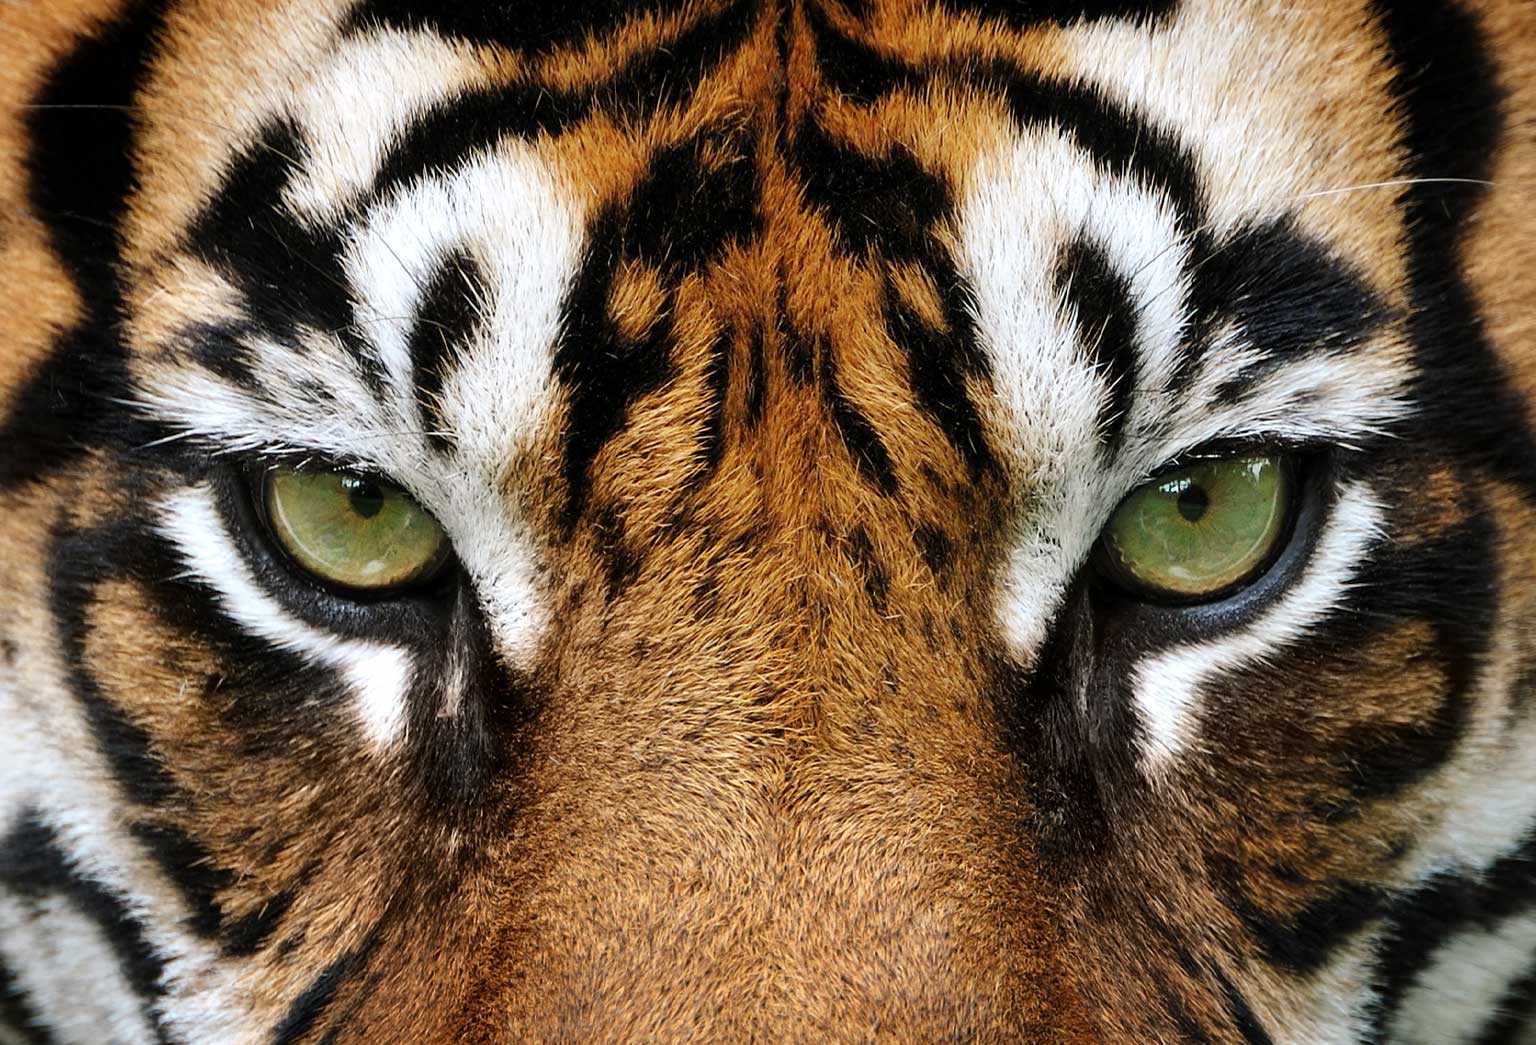 10 surprising tiger facts that will make you love these big cats even more!